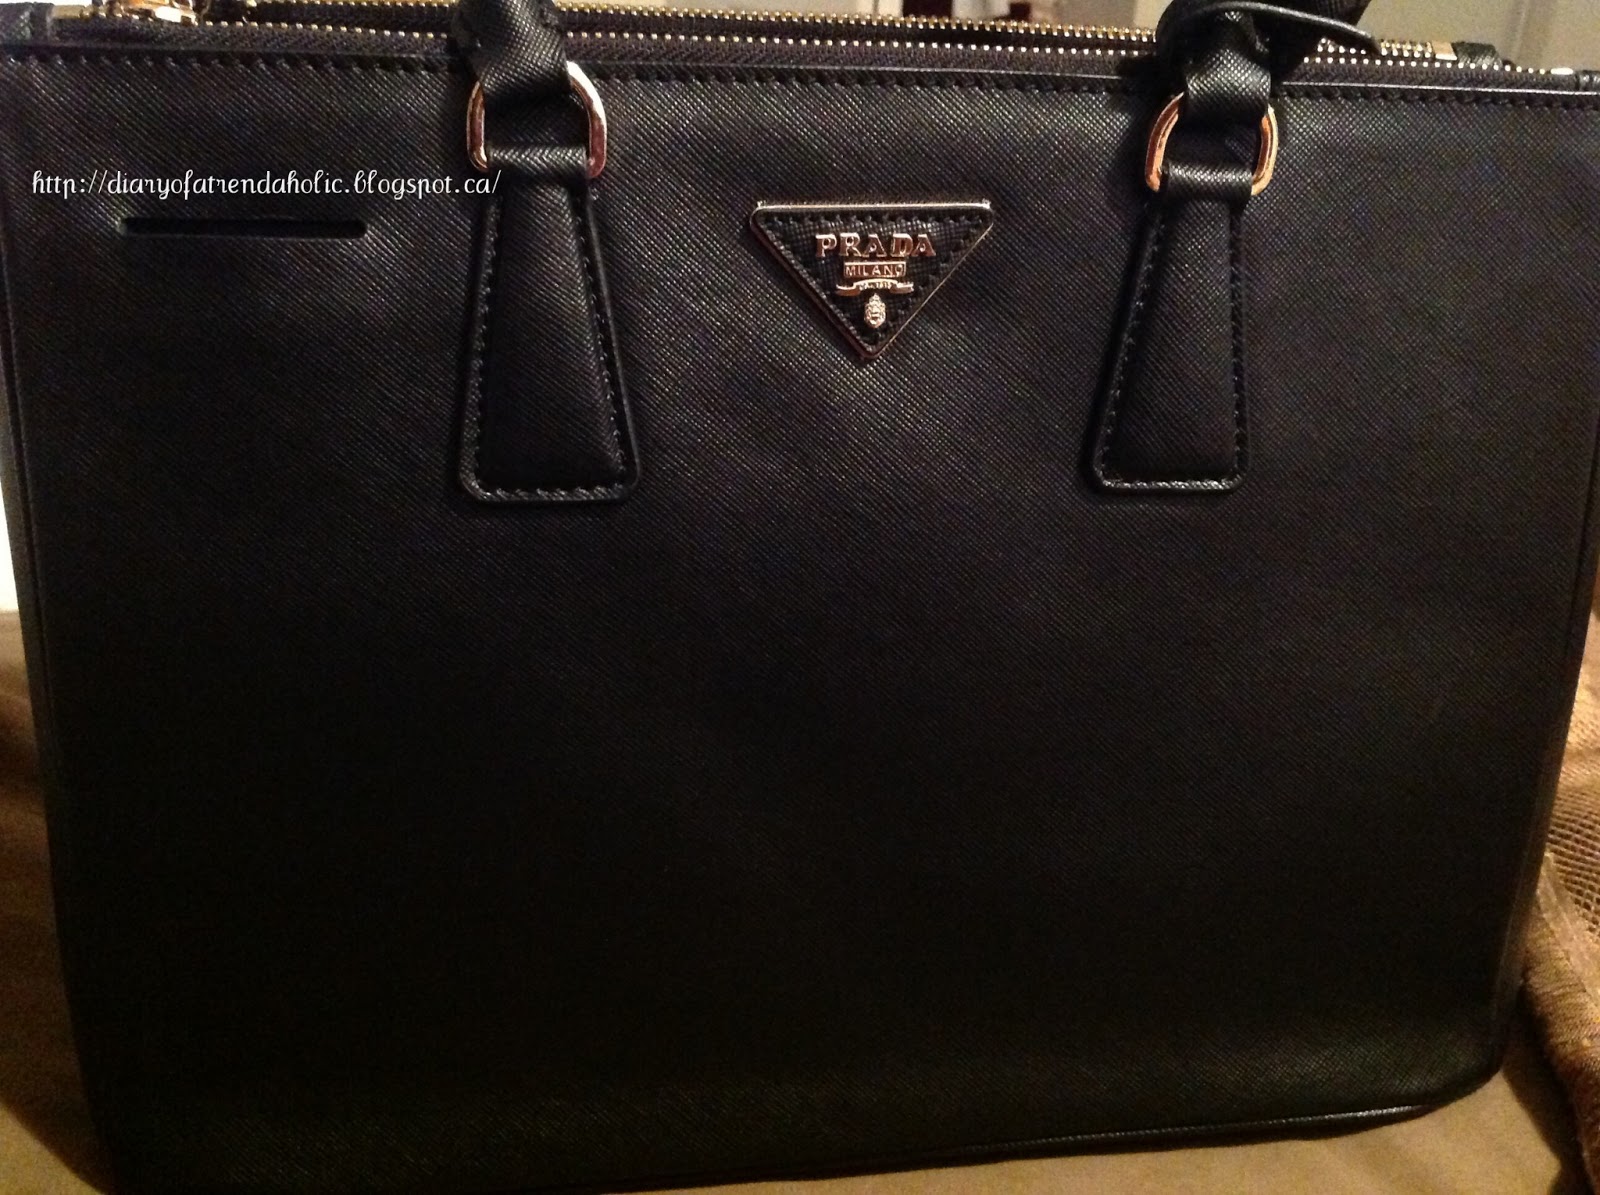 chose to get a simple black bag because it goes with everything.